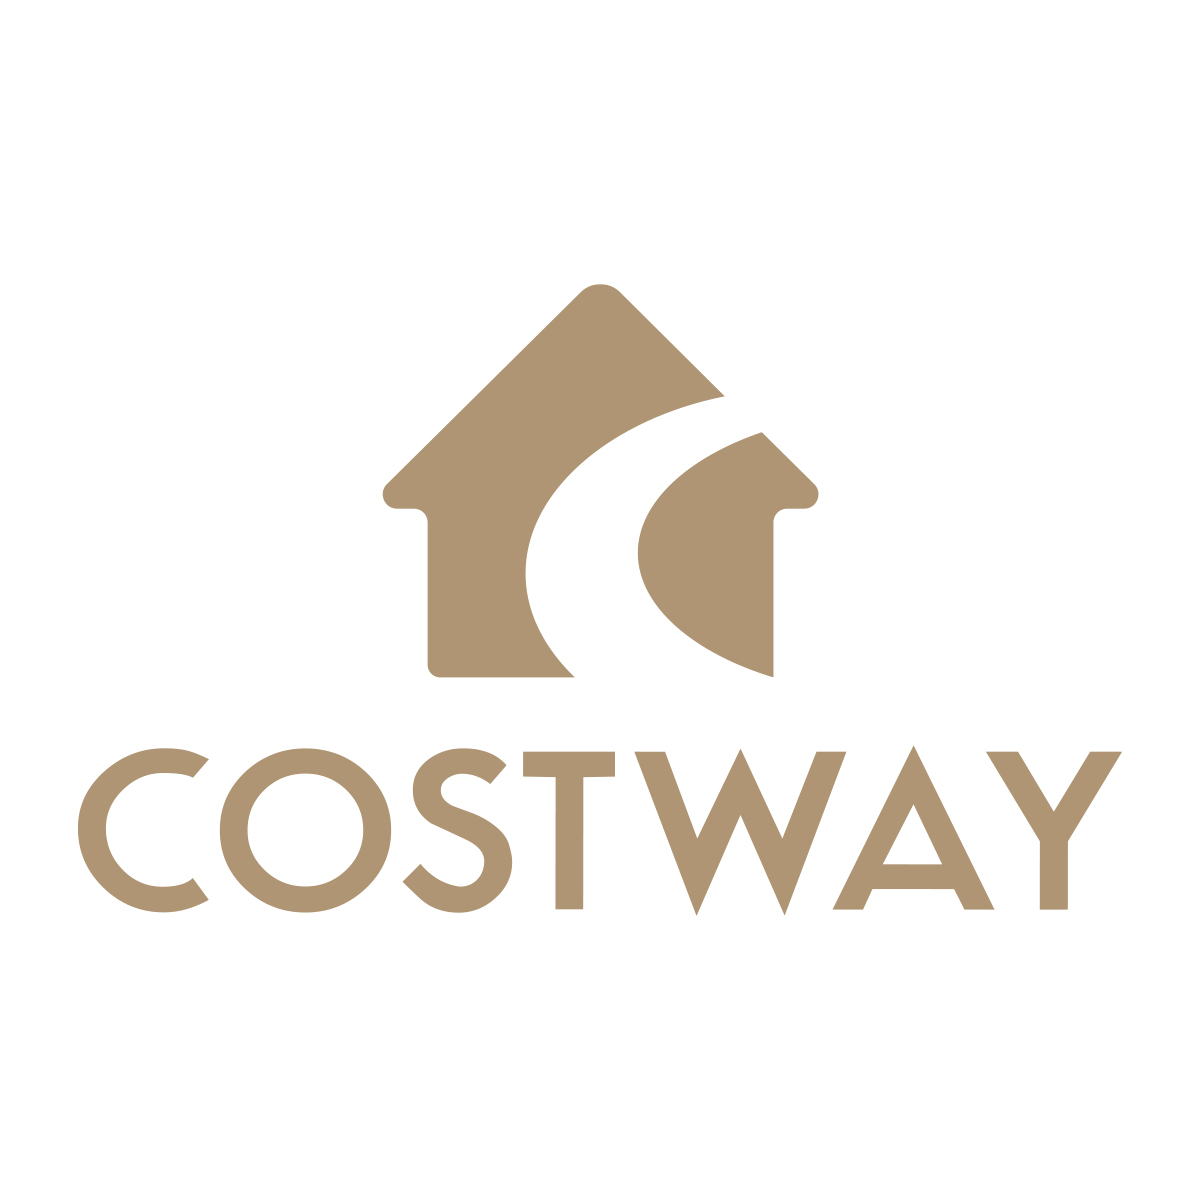 Costway Discounts and Cash Back for Everyone